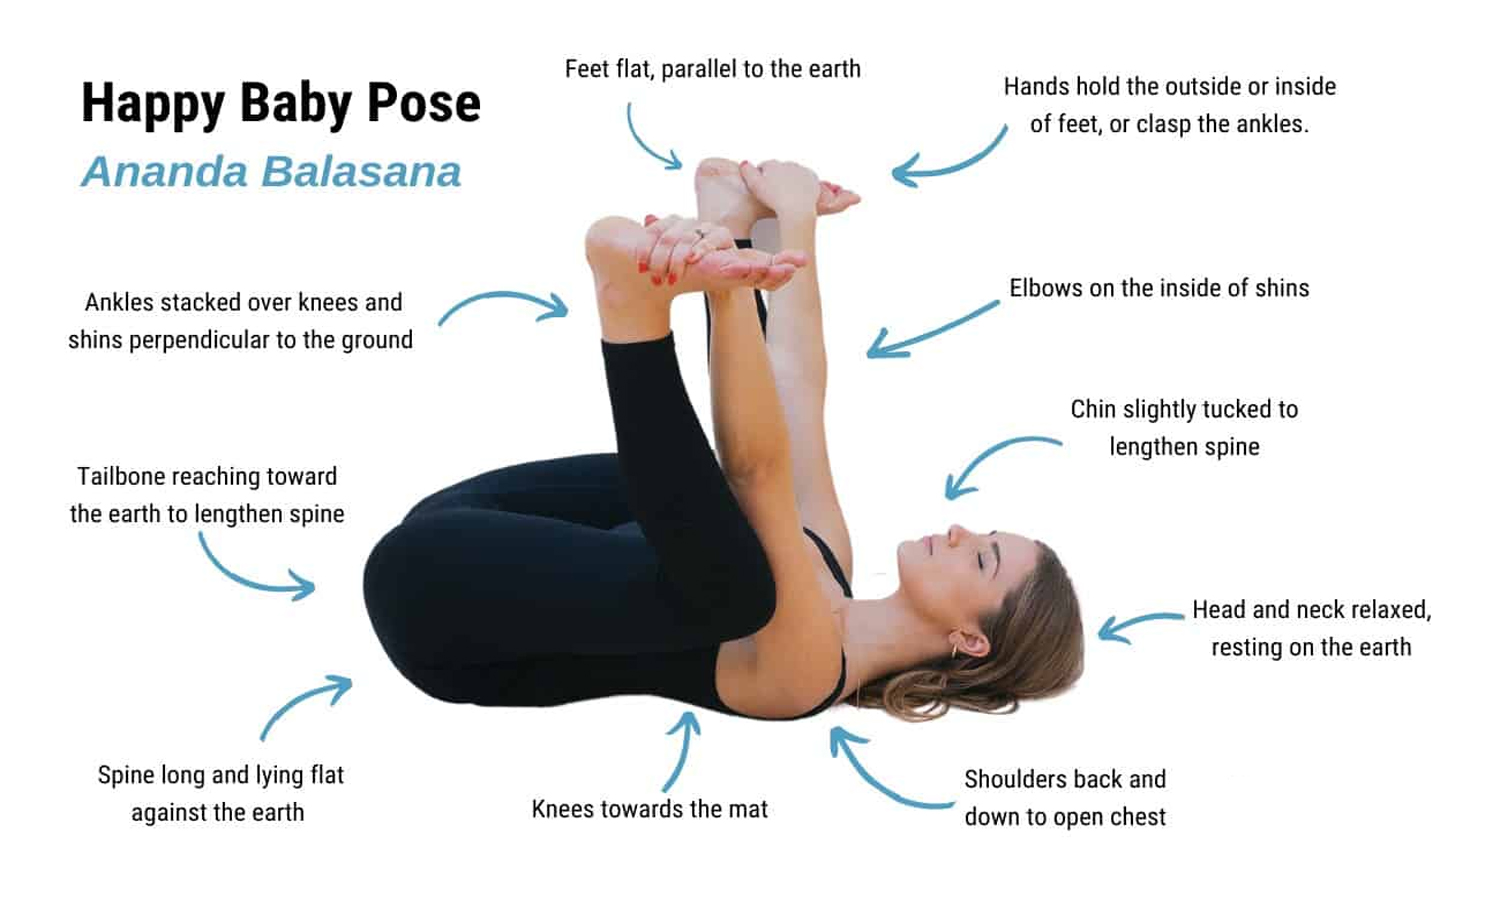 Make your spine happy with this pose 😁 It's a beautiful way to finish your  asana practice relieving any tensions in your body before going to  shavasana 🙏 Shan't to learn more